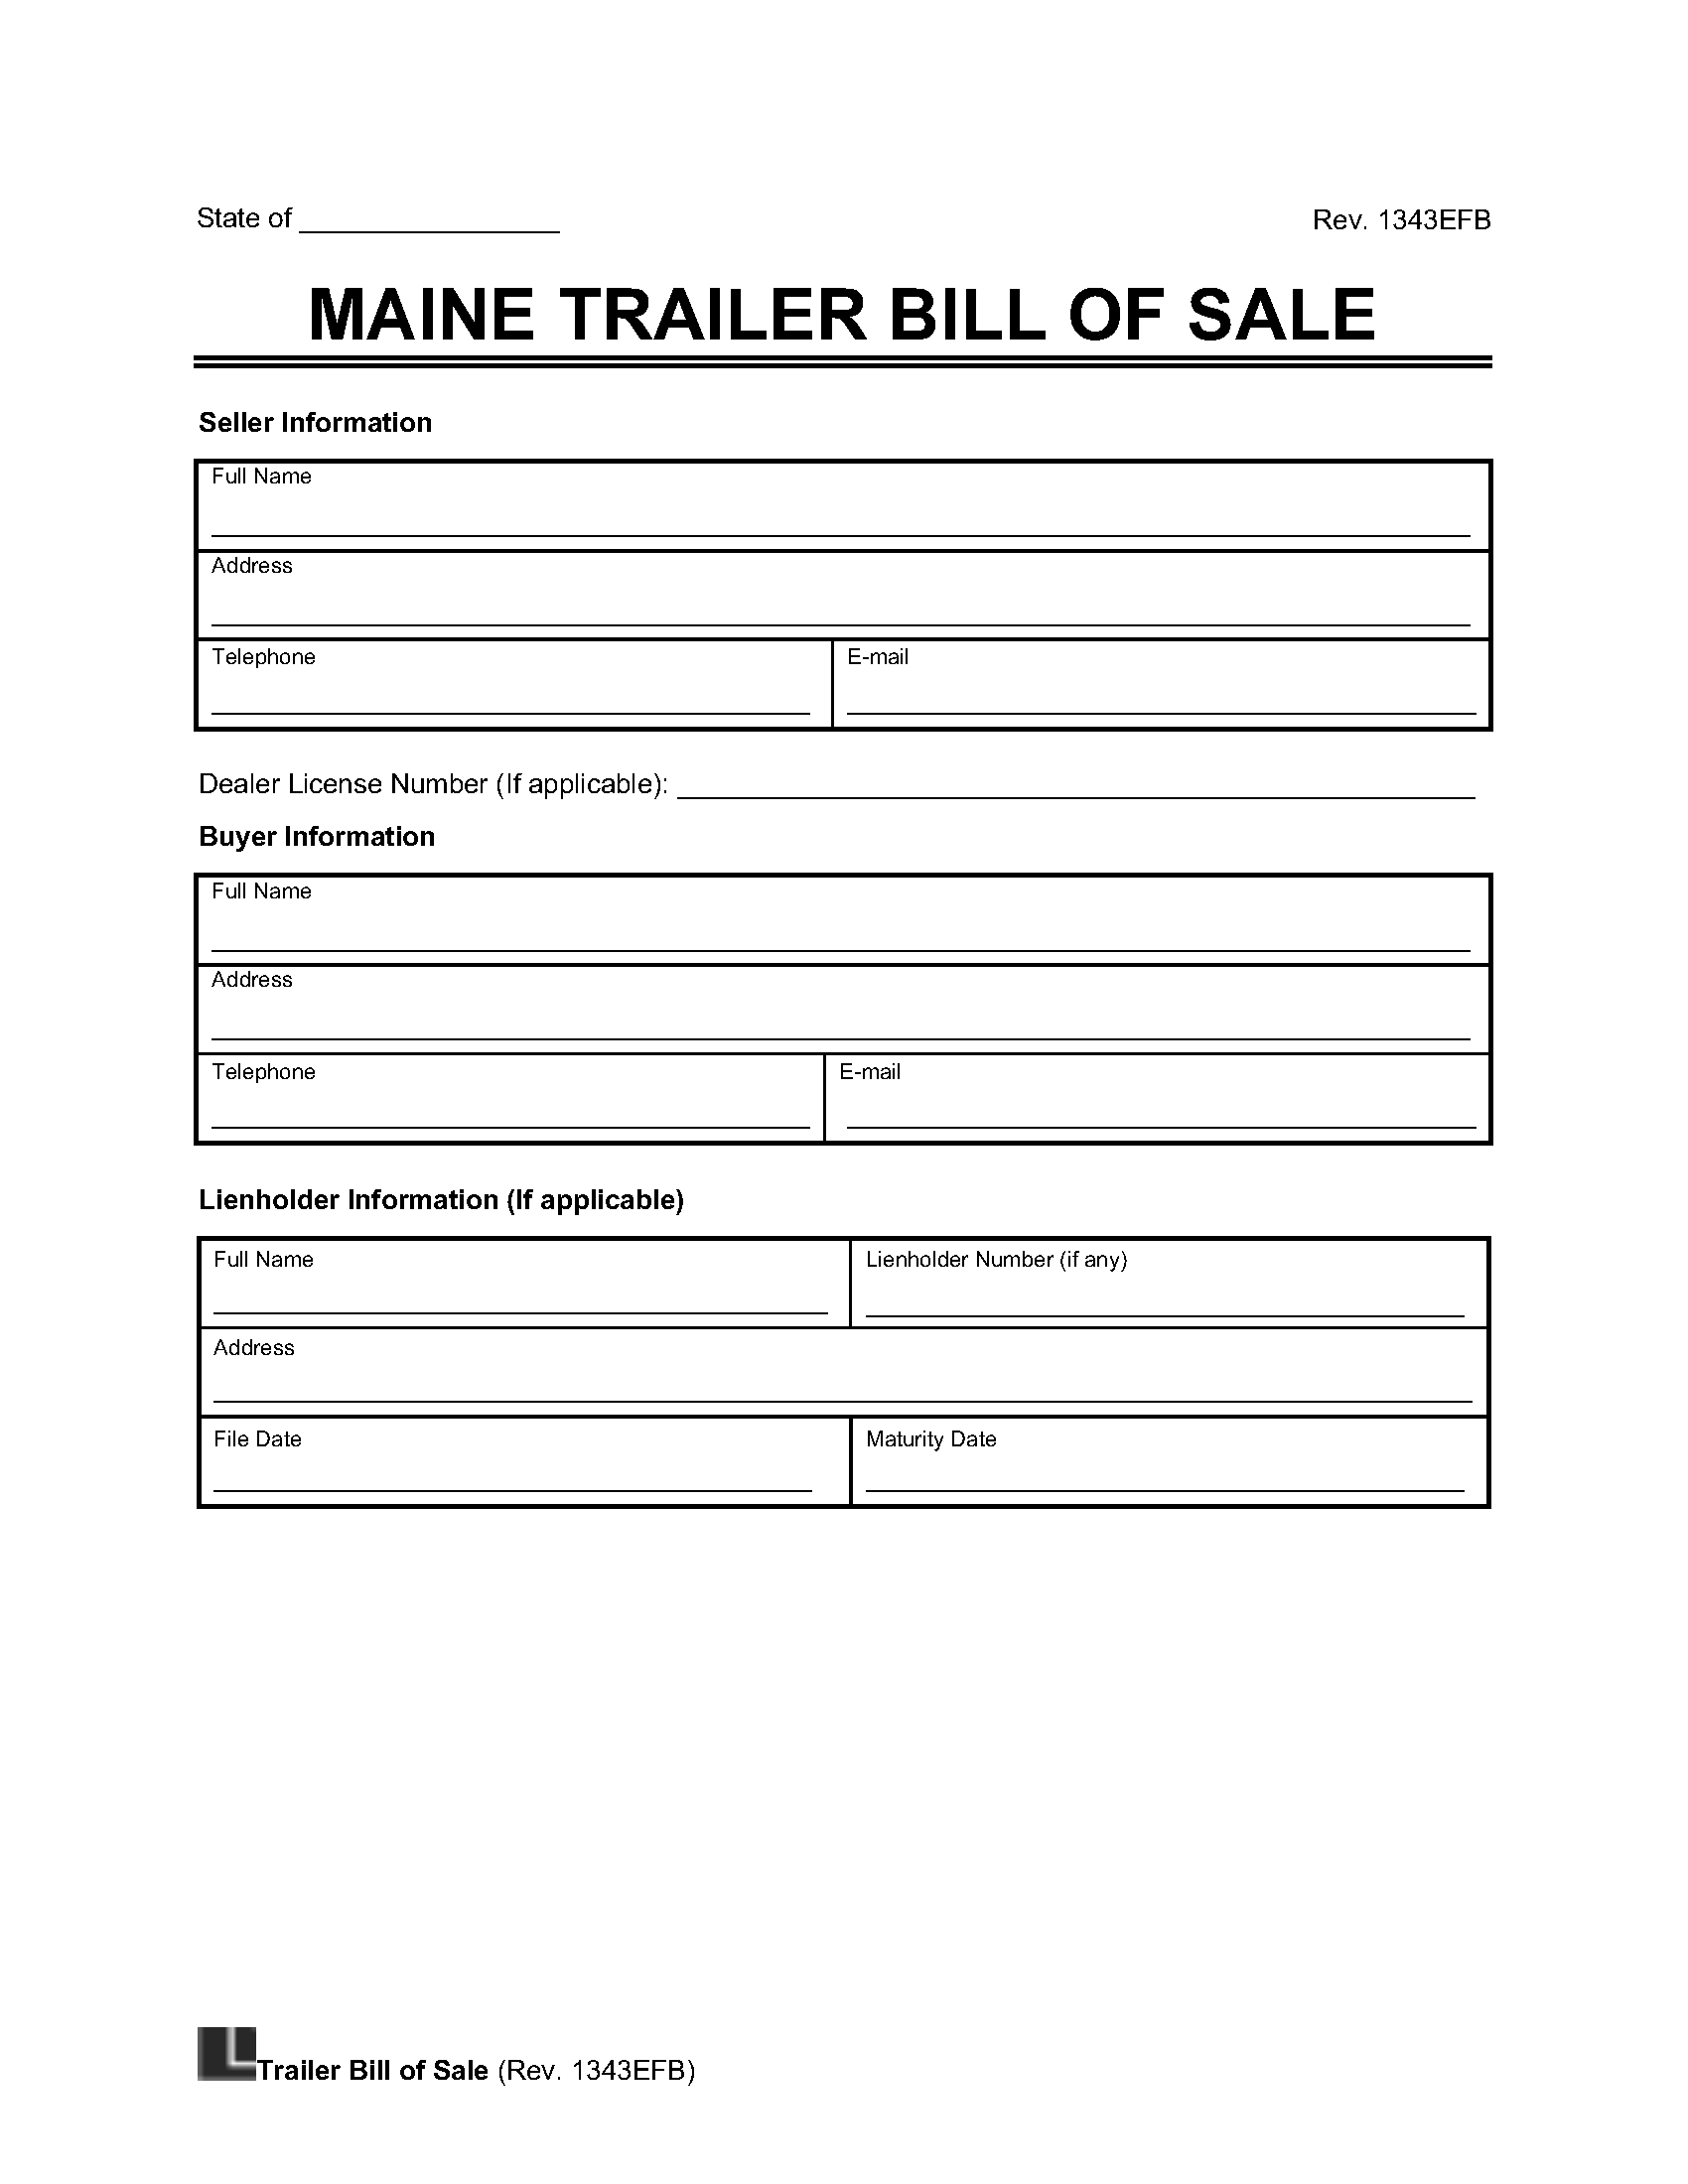 free-maine-trailer-bill-of-sale-template-pdf-word-legal-templates